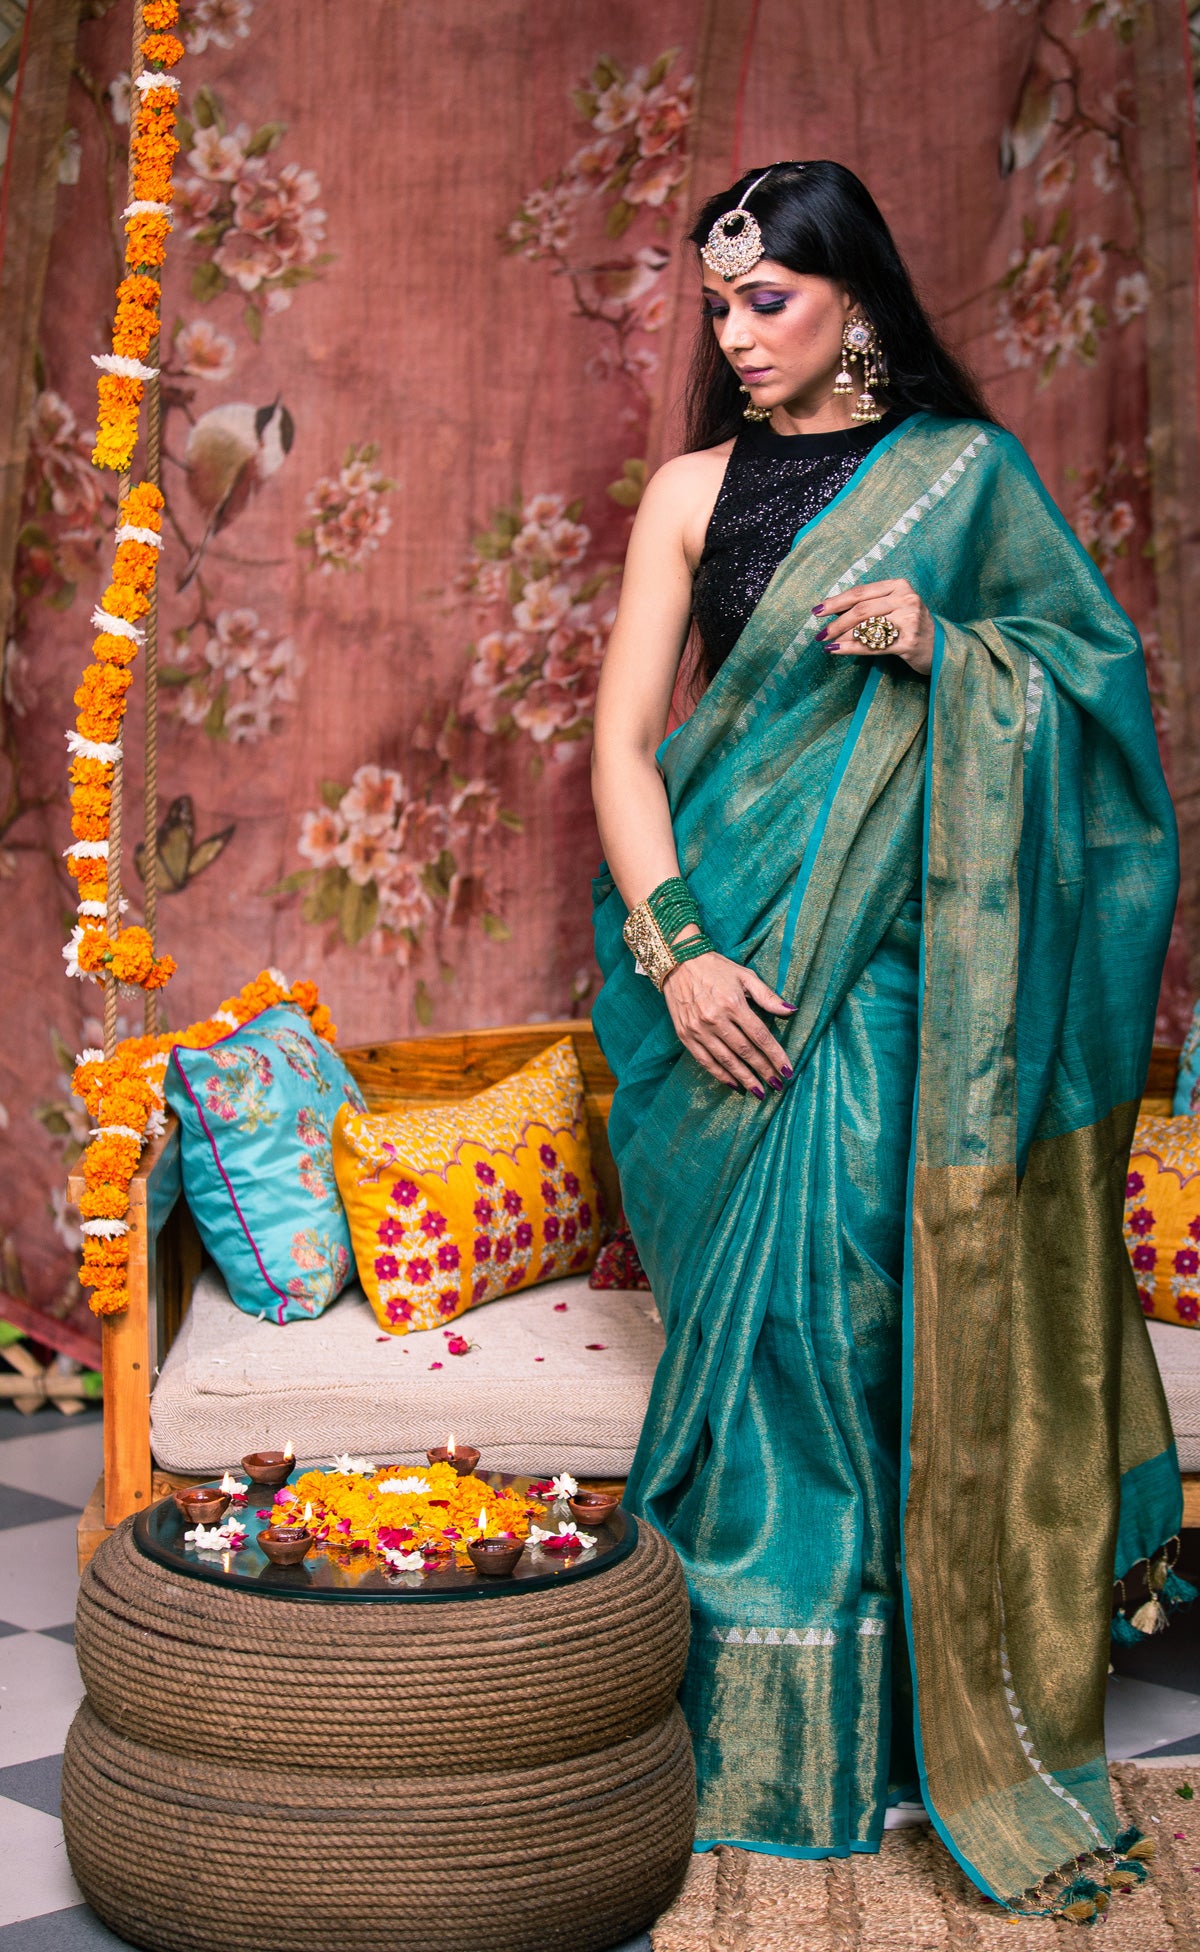 Teal Green Premium Tissue Linen Saree - Elegant draping fabric in rich teal green color